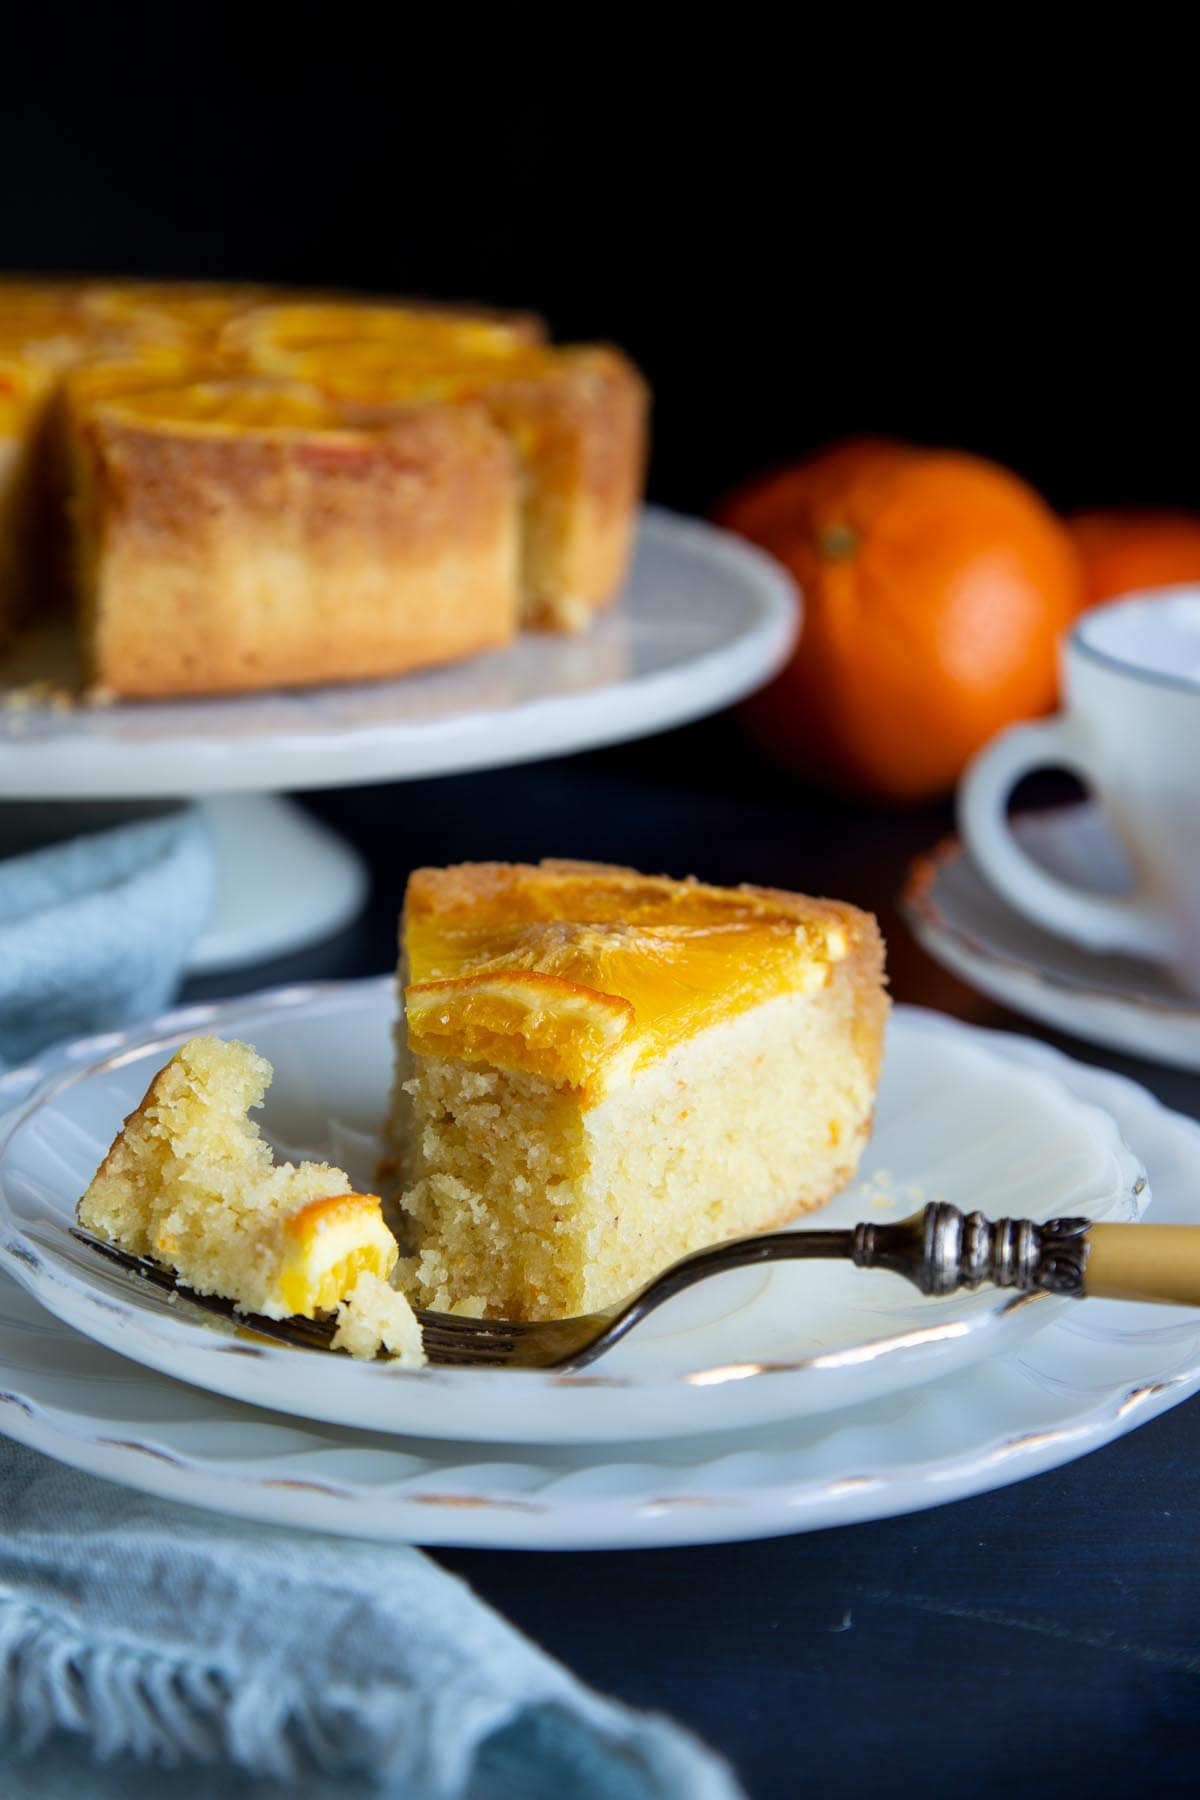 A slice of orange almond cake on a plate with a piece of cake on a fork.